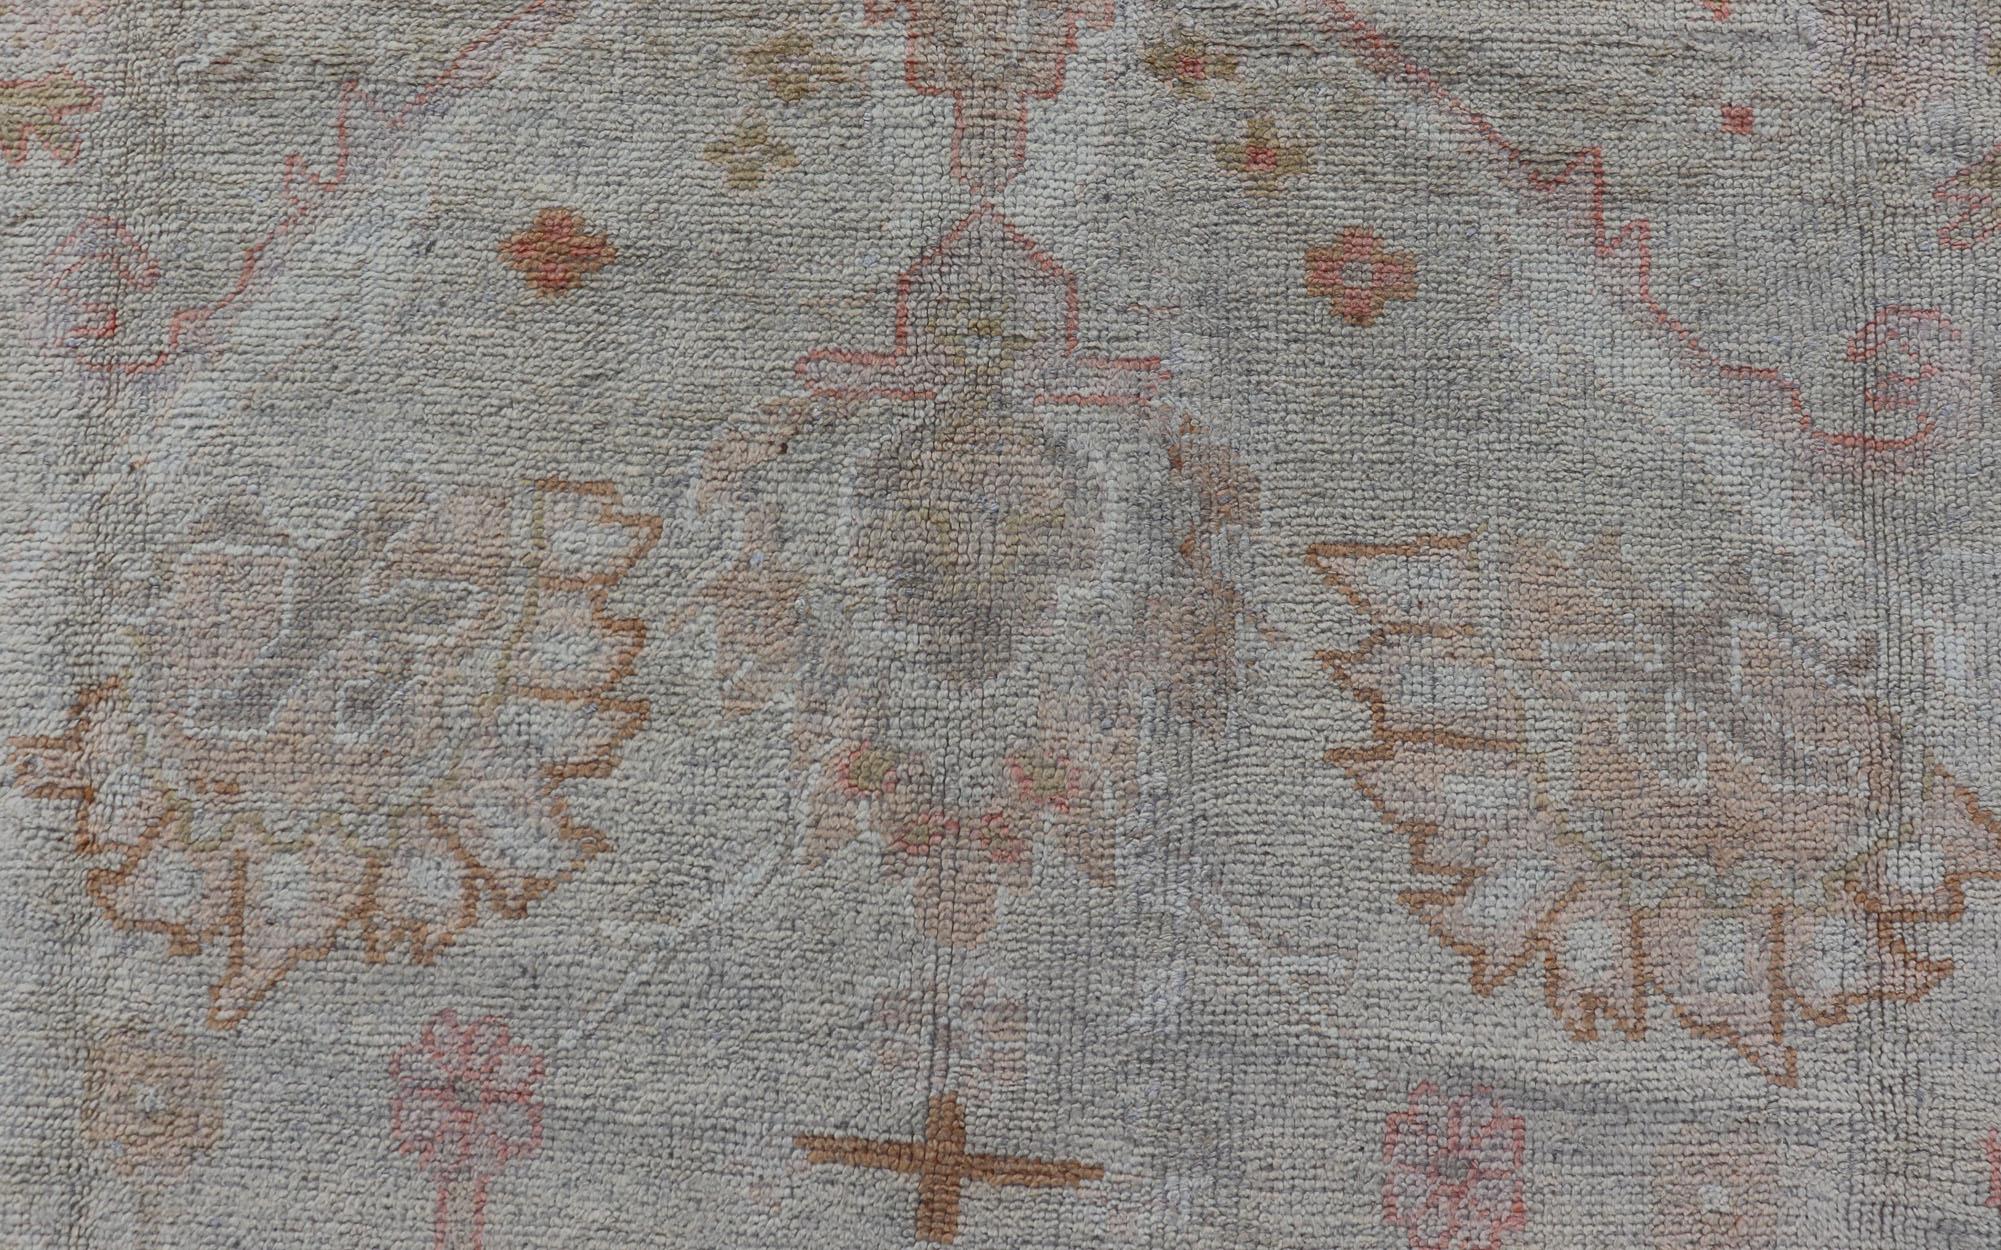 Antique Turkish Large Oushak Rug in Taupe, Light Green and Light Copper In Good Condition For Sale In Atlanta, GA